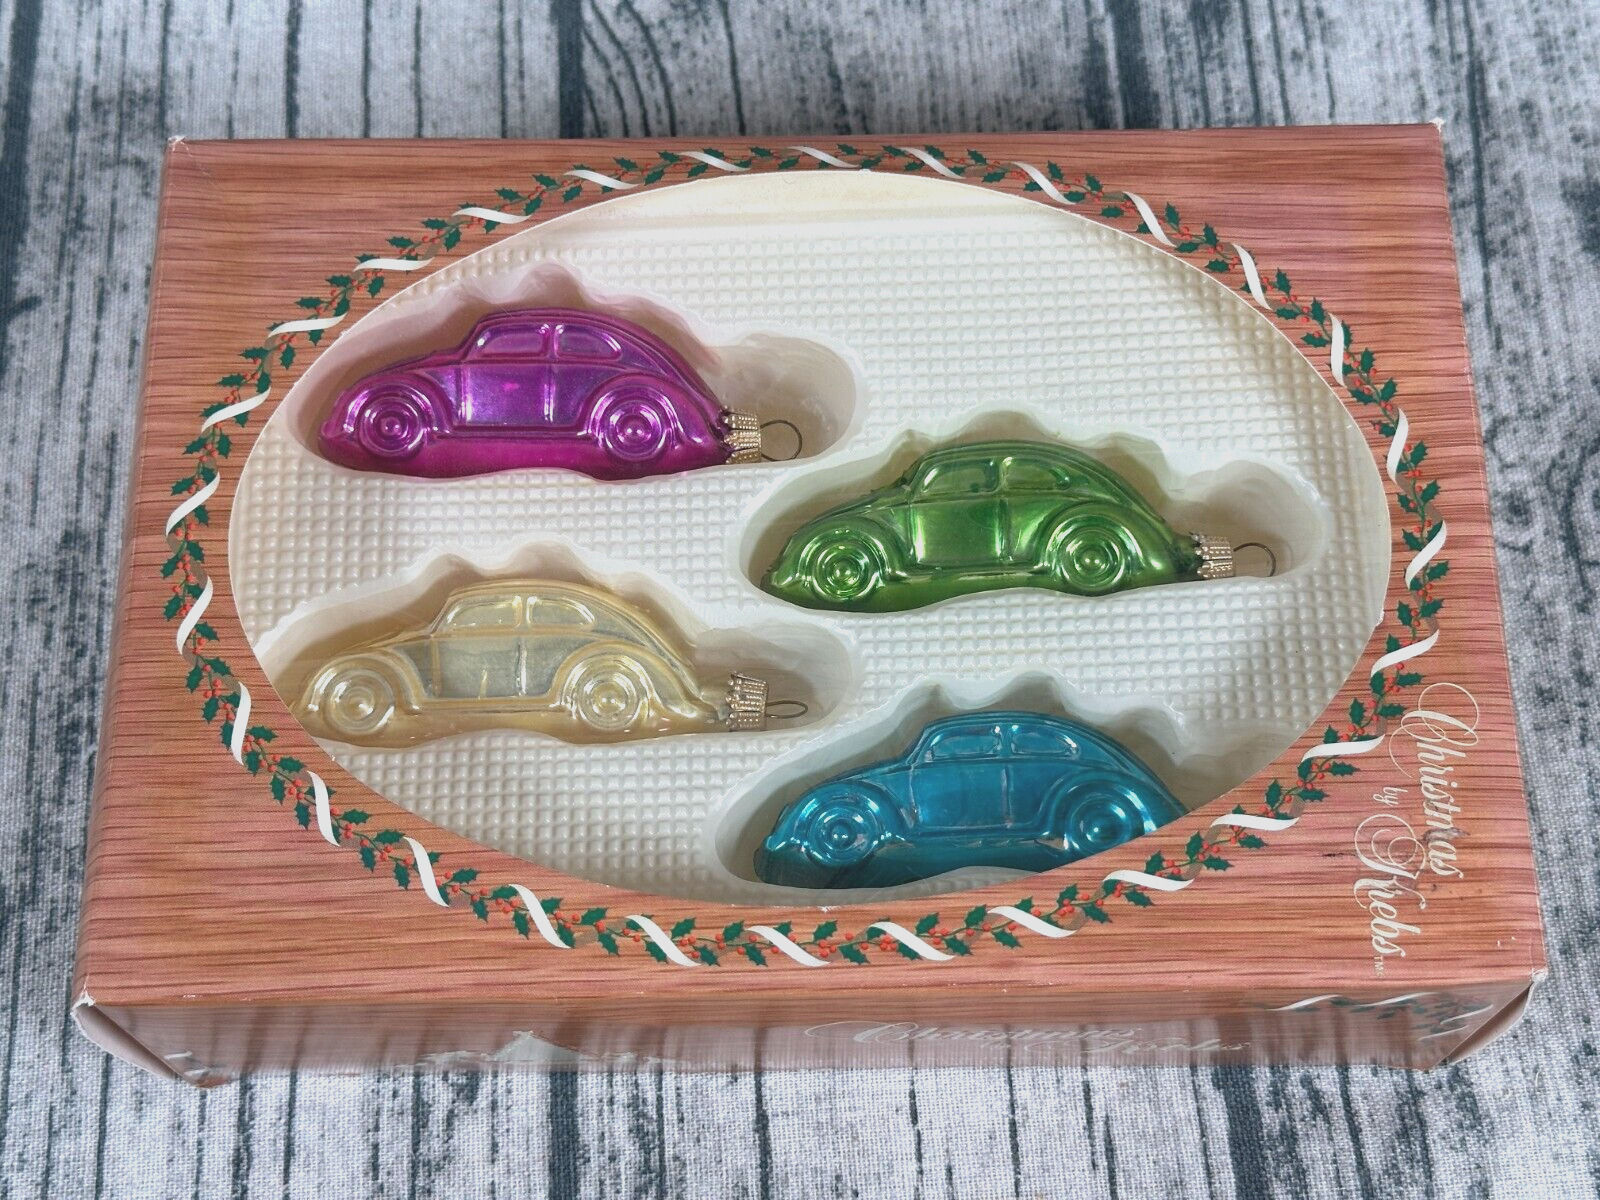 Volkswagen Beetle Christmas Ornaments Made by Christmas by Krebs